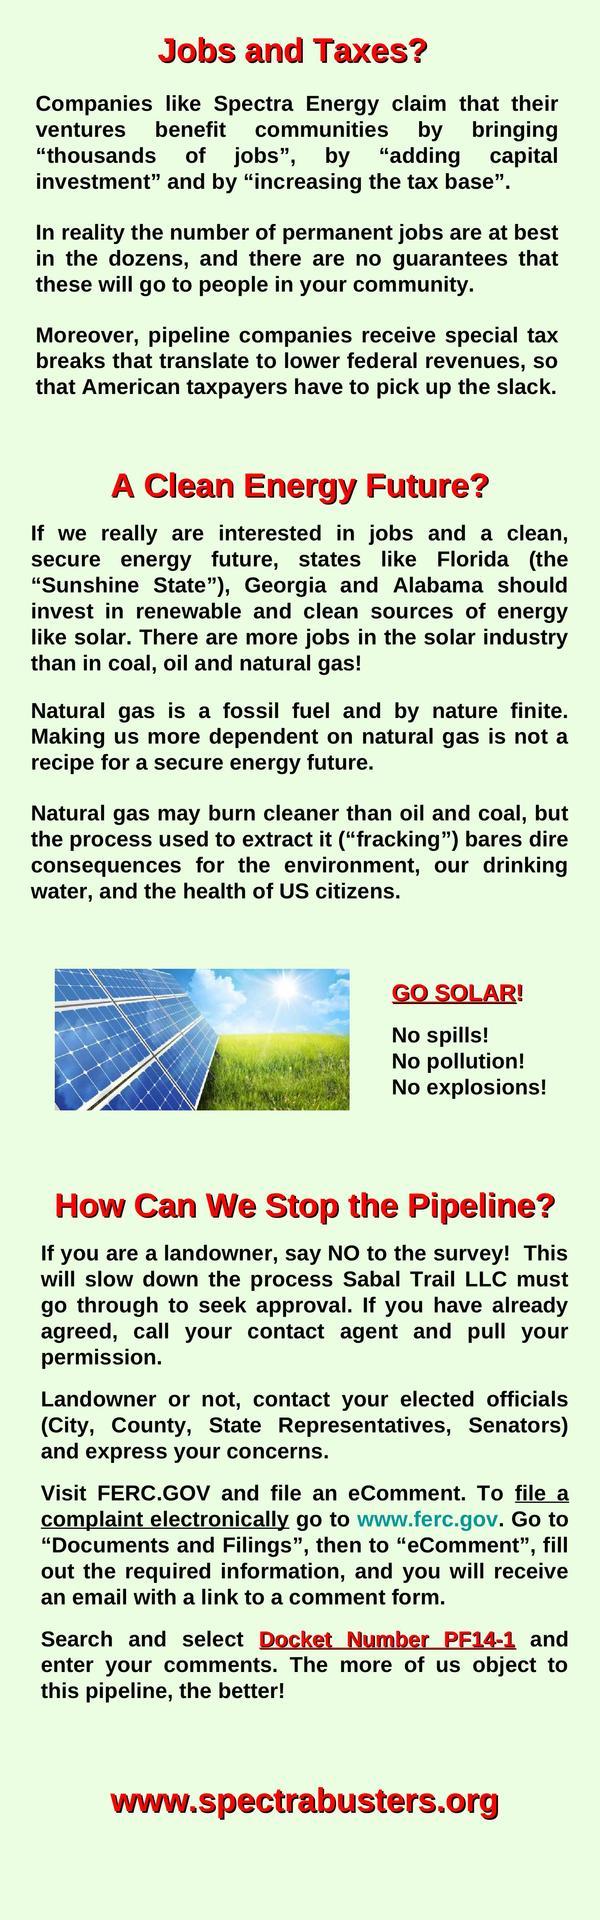 600x1920 SabalXTrailXsideXpanelX2-001, in SpectraBusters poster about Sabal Trail fracked methane pipeline, by Michael G. Noll, for SpectraBusters.org